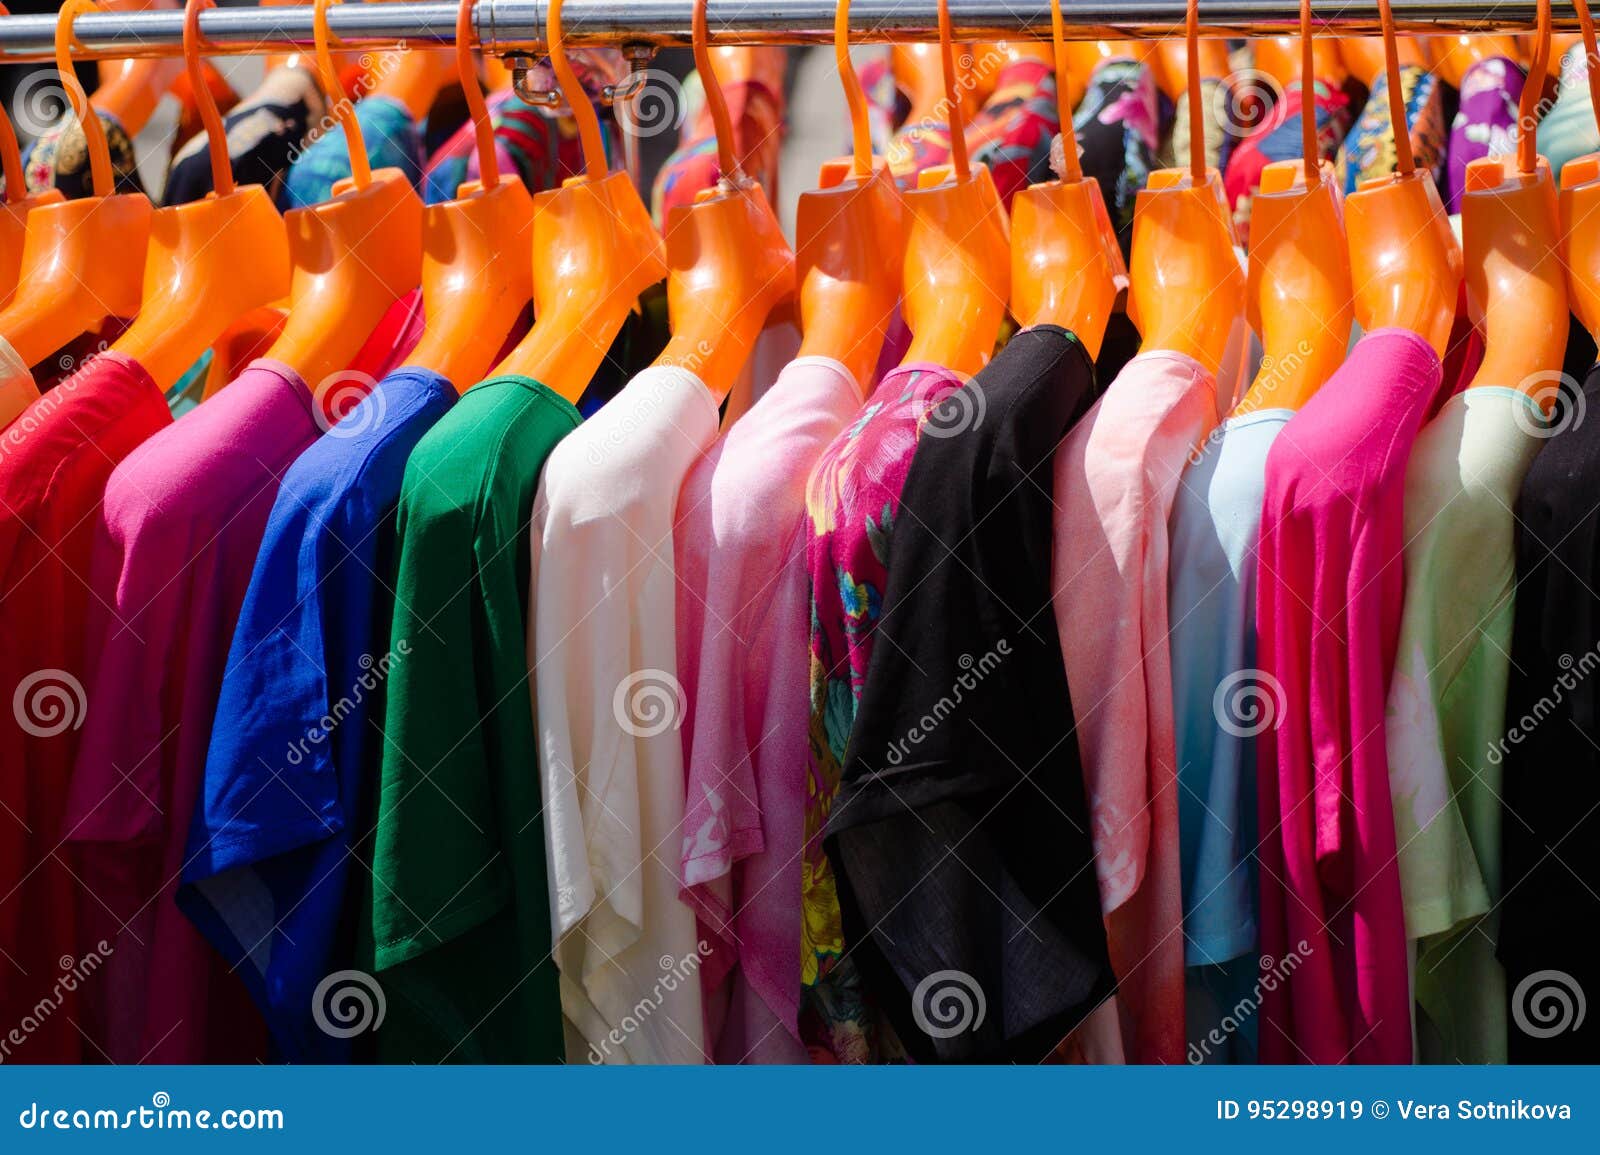 Multicolored T-shirts on Hangers for Sale at a Street Fair Stock Image ...